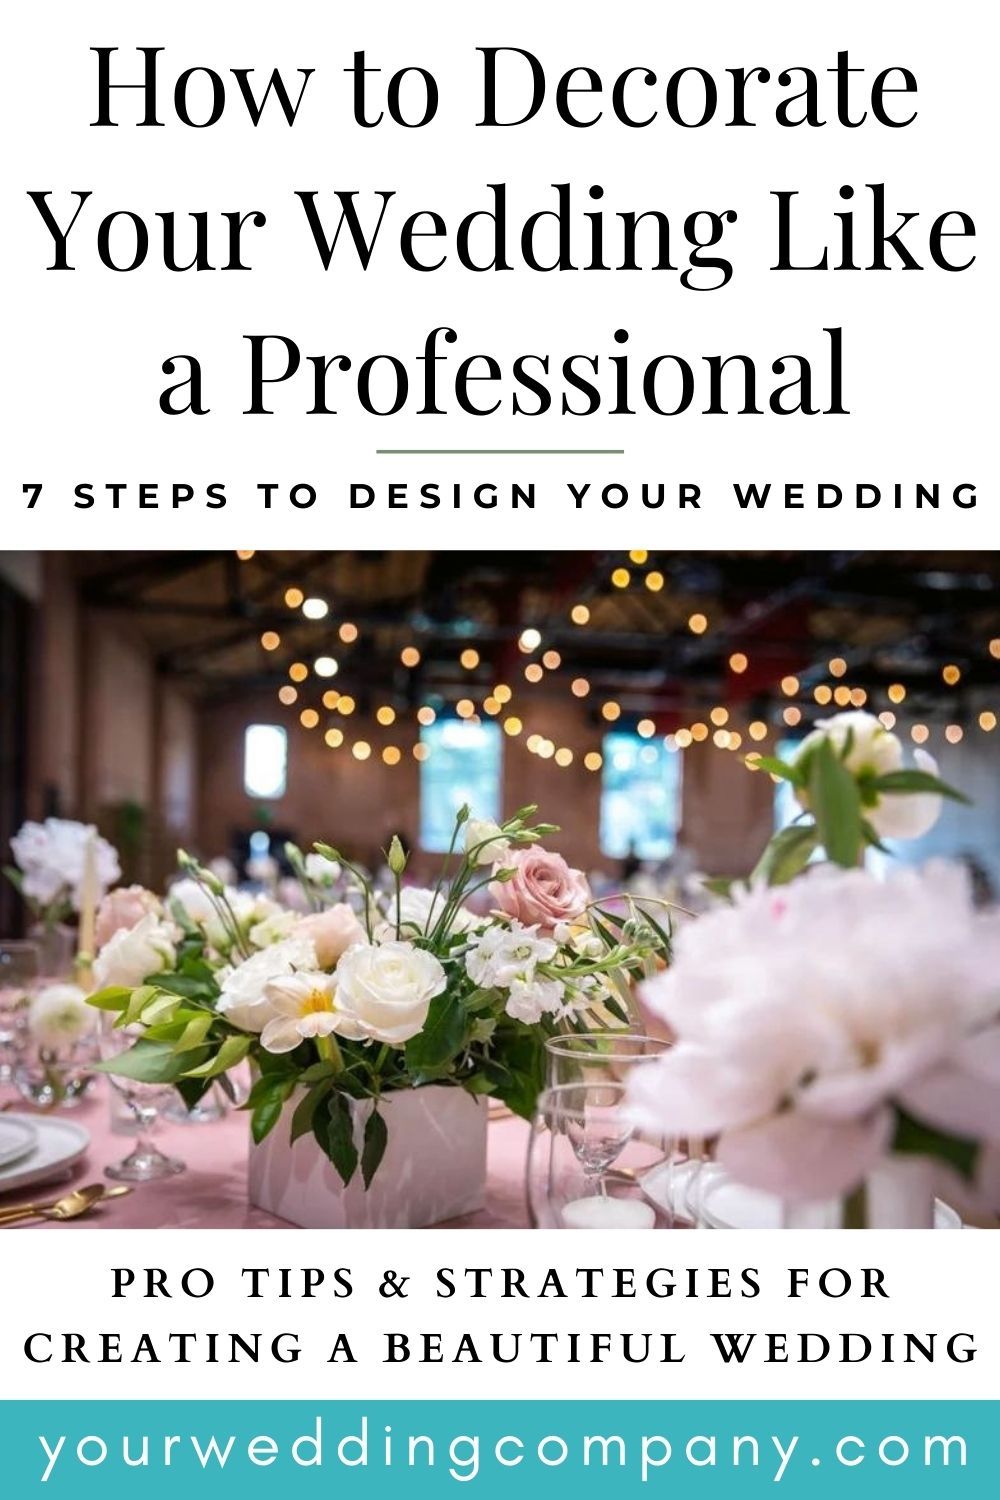 How to Decorate Your Wedding like A Professional - 7 Easy Steps